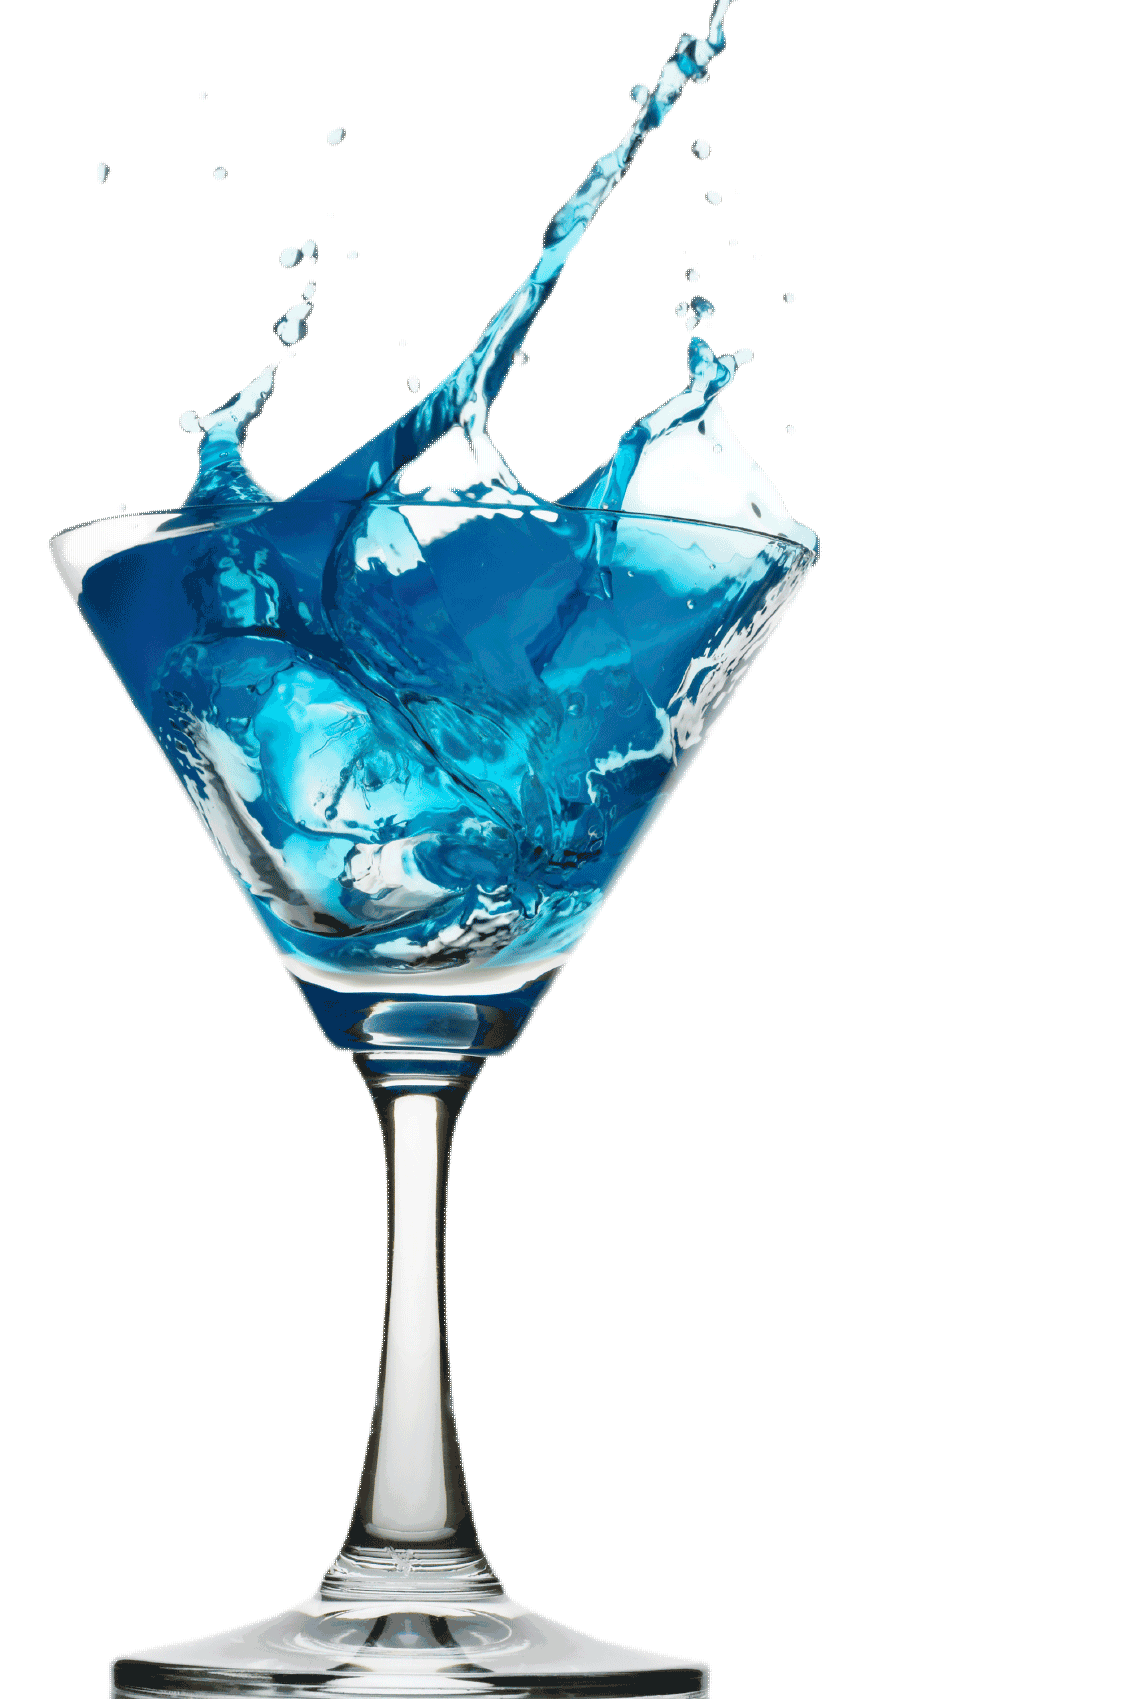 About . Cocktails clipart blue lagoon